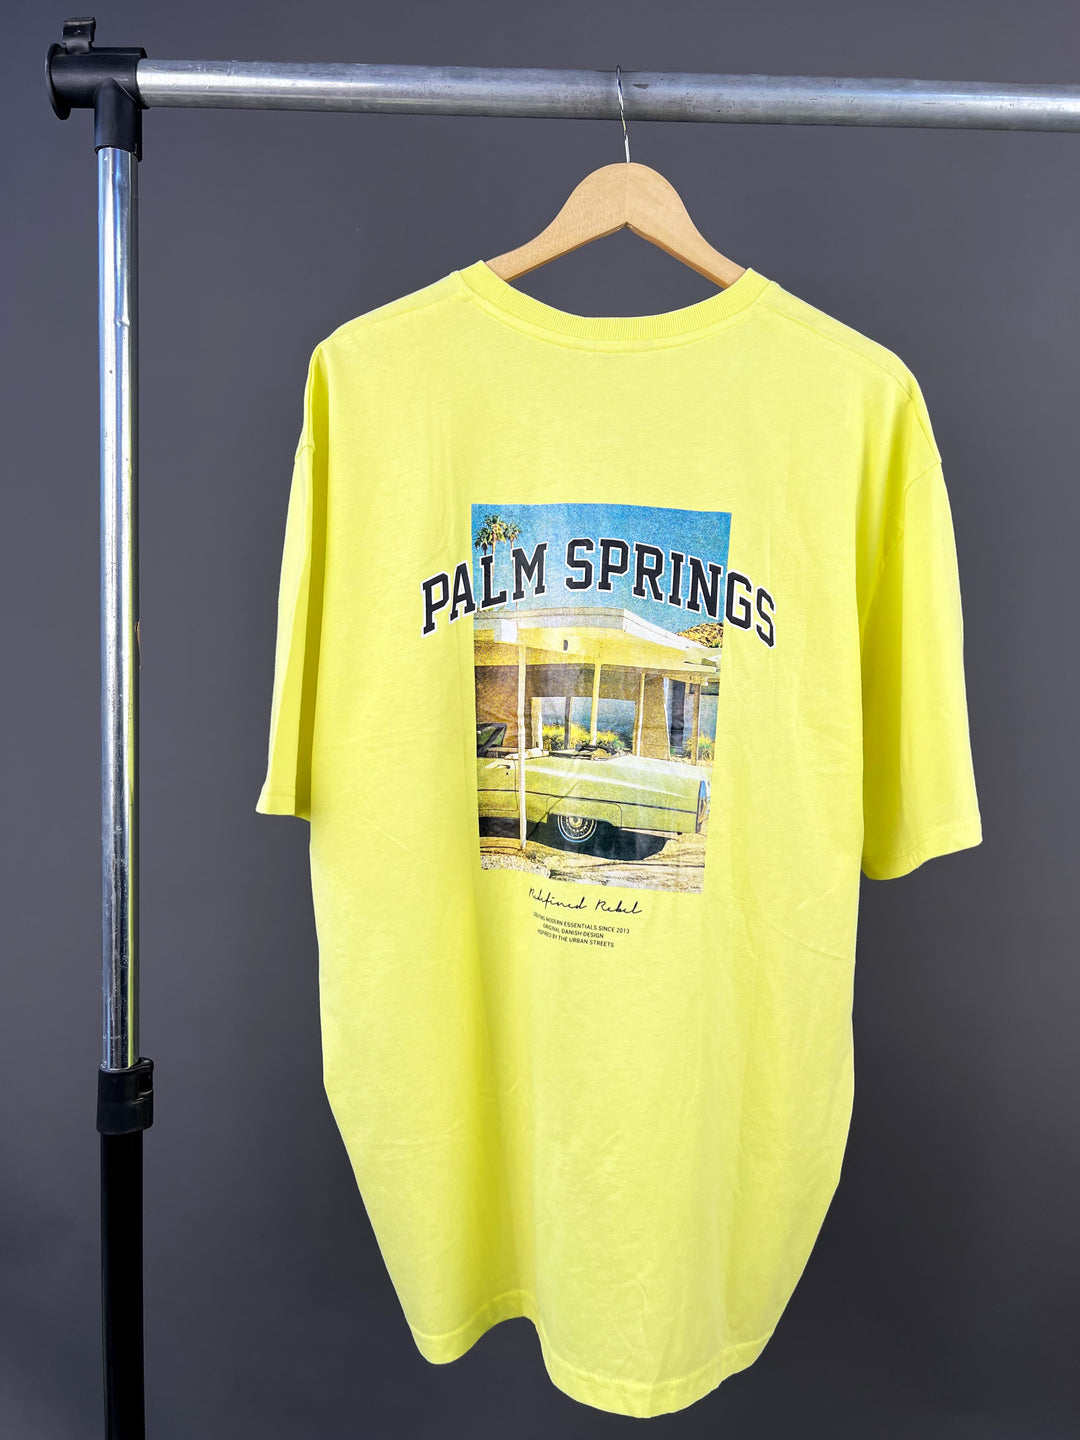 Palm Springs backprint t-shirt in yellow